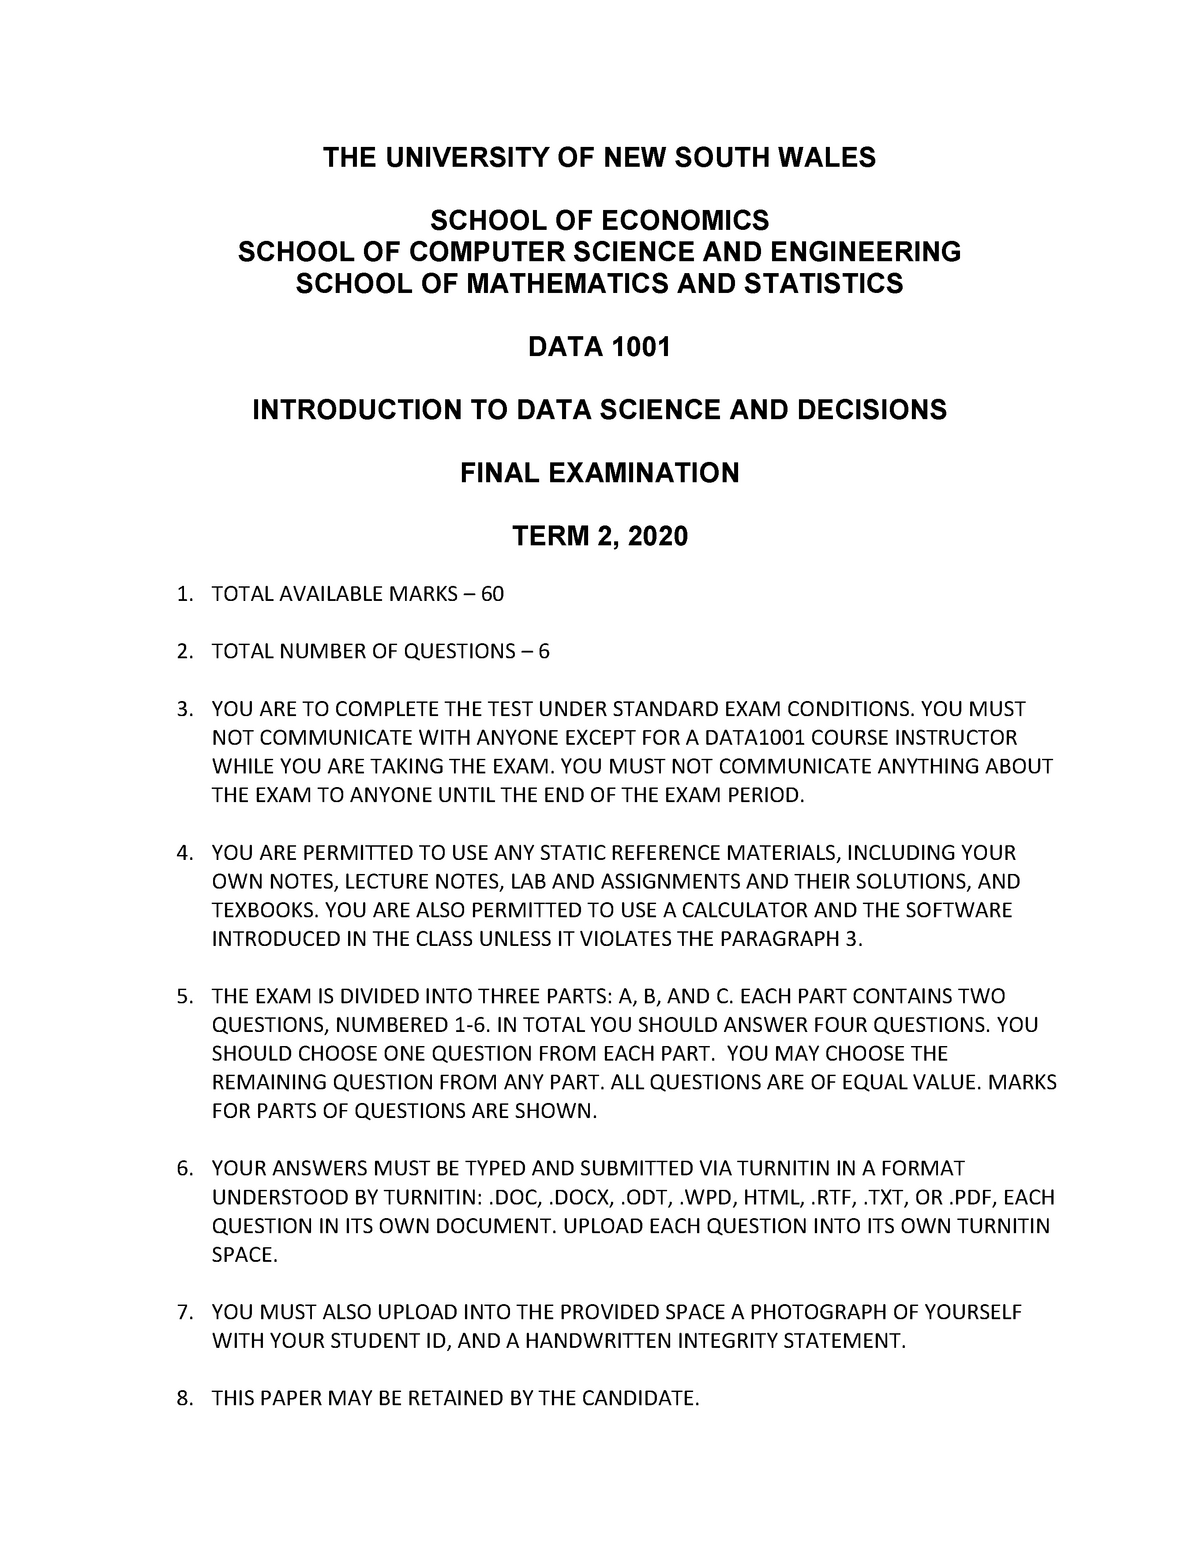 data1001-final-exam-2020t2-the-university-of-new-south-wales-school